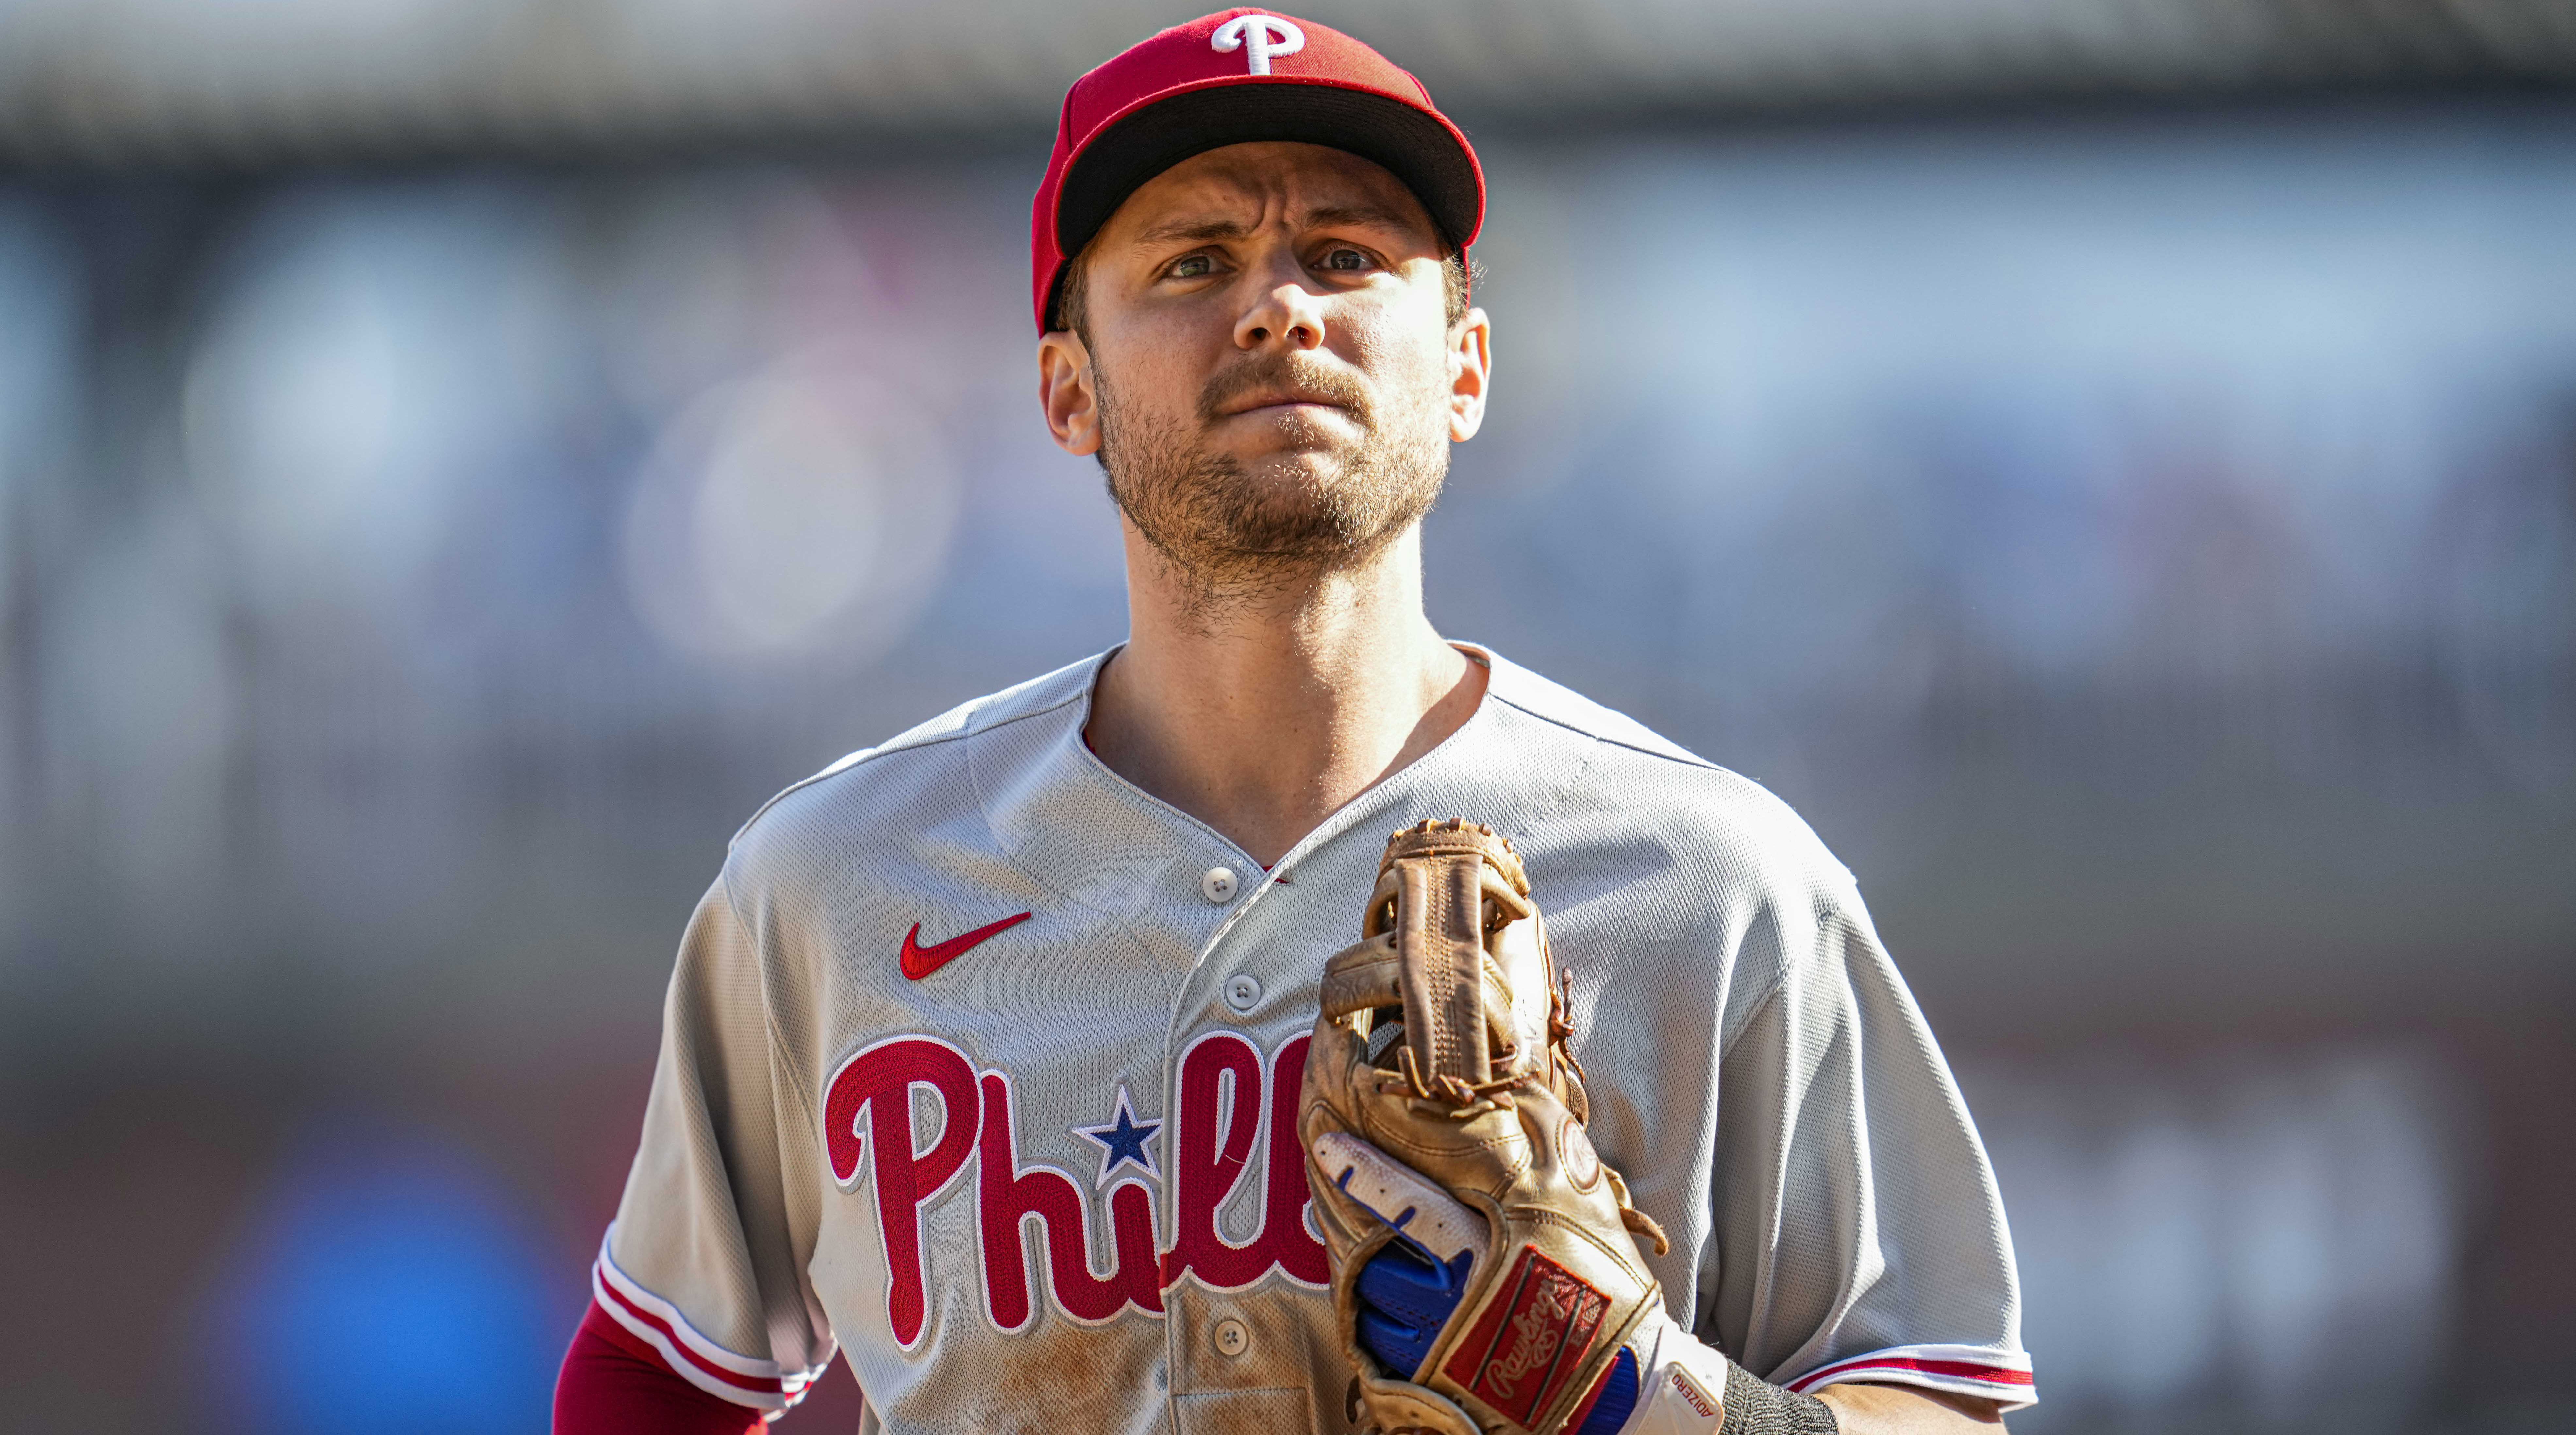 Playoffs? These stats show what the Phillies are up against to beat the odds